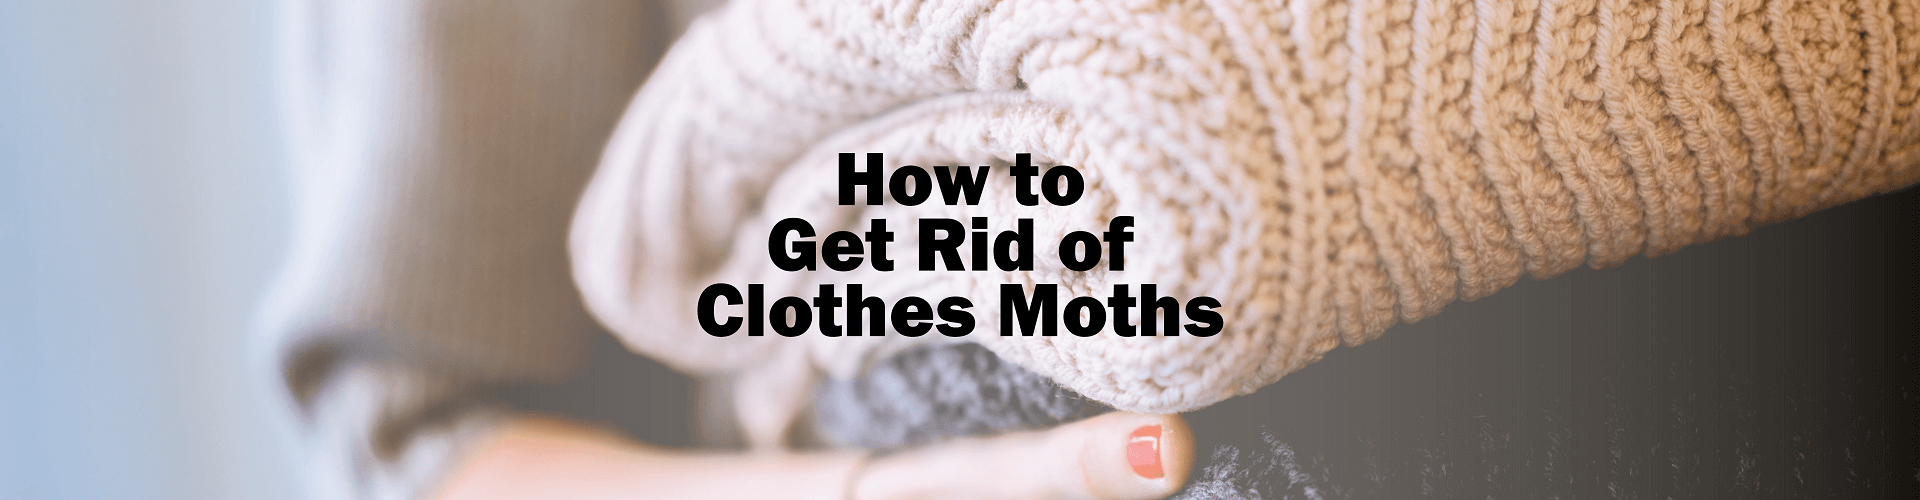 how to get rid of clothes moths - south end storage in charlotte, nc